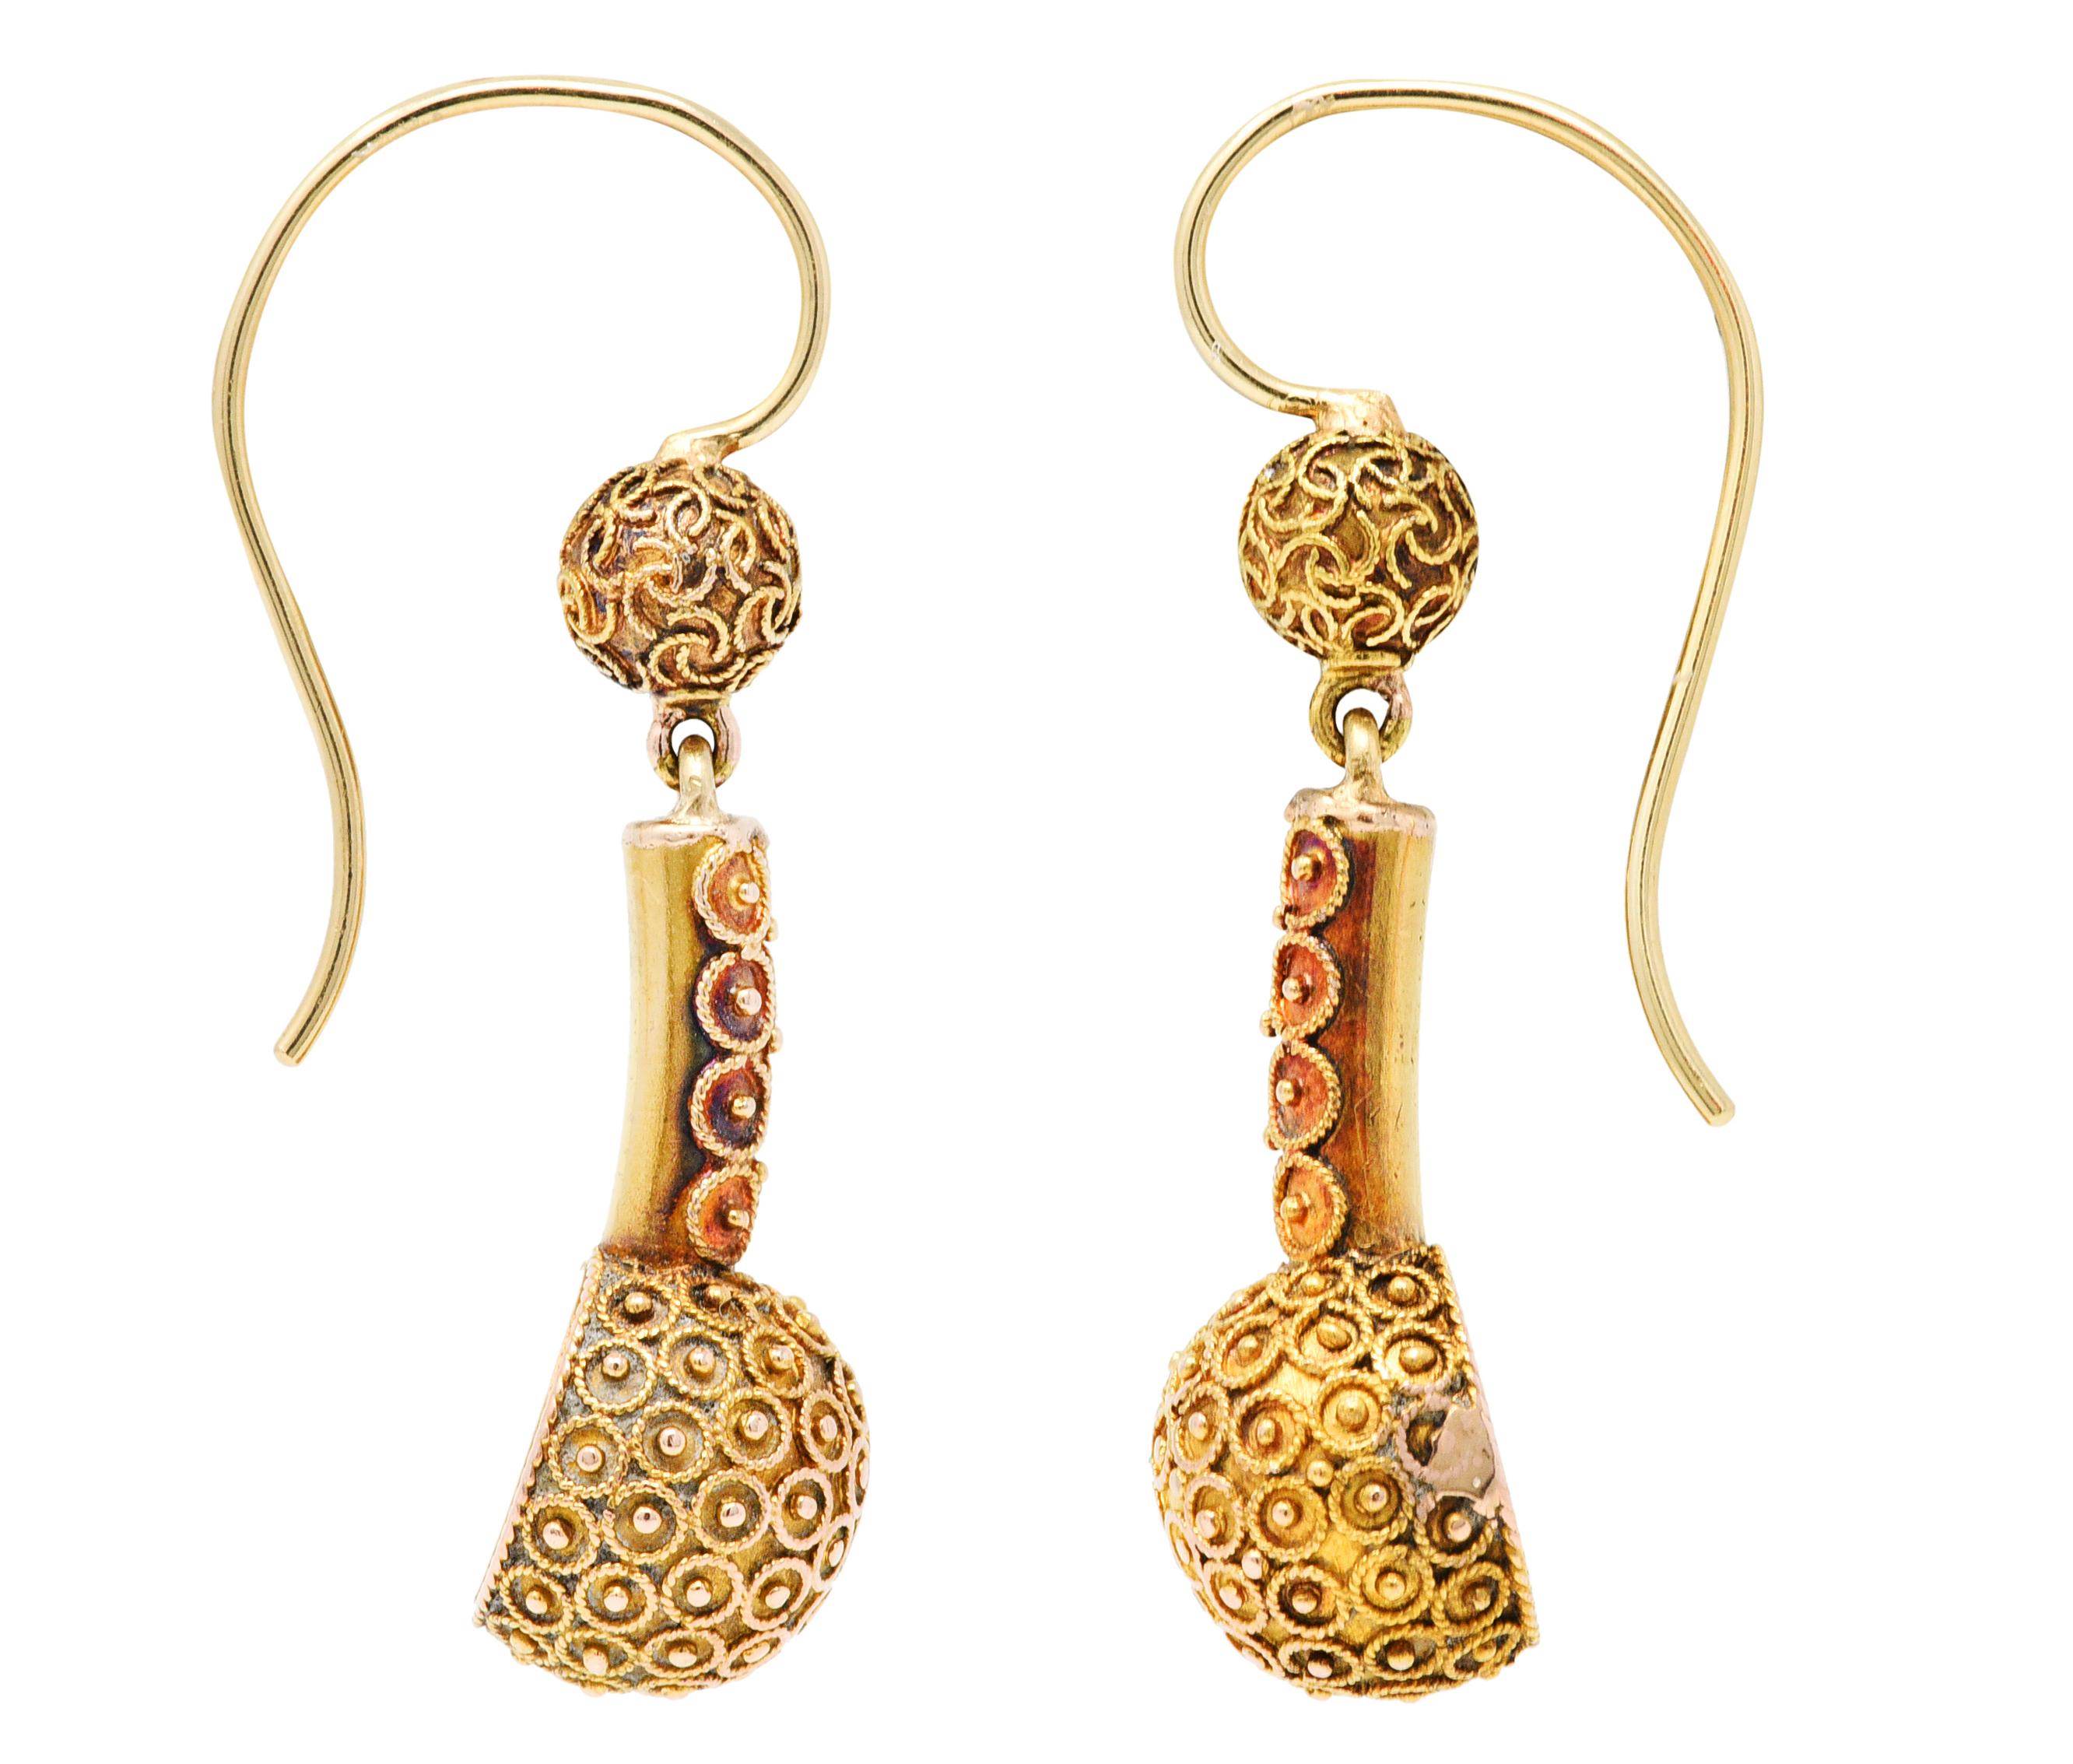 Shepherd hook earrings have a 5.6 mm ball surmount

Suspending an elongated bar terminating as a 10.4 mm ball

With twisted rope and gold bead accents throughout

Tested as 14 karat gold

Circa: 1870s

Measures: 3/8 x 1 1/8 inch

Total weight: 4.7